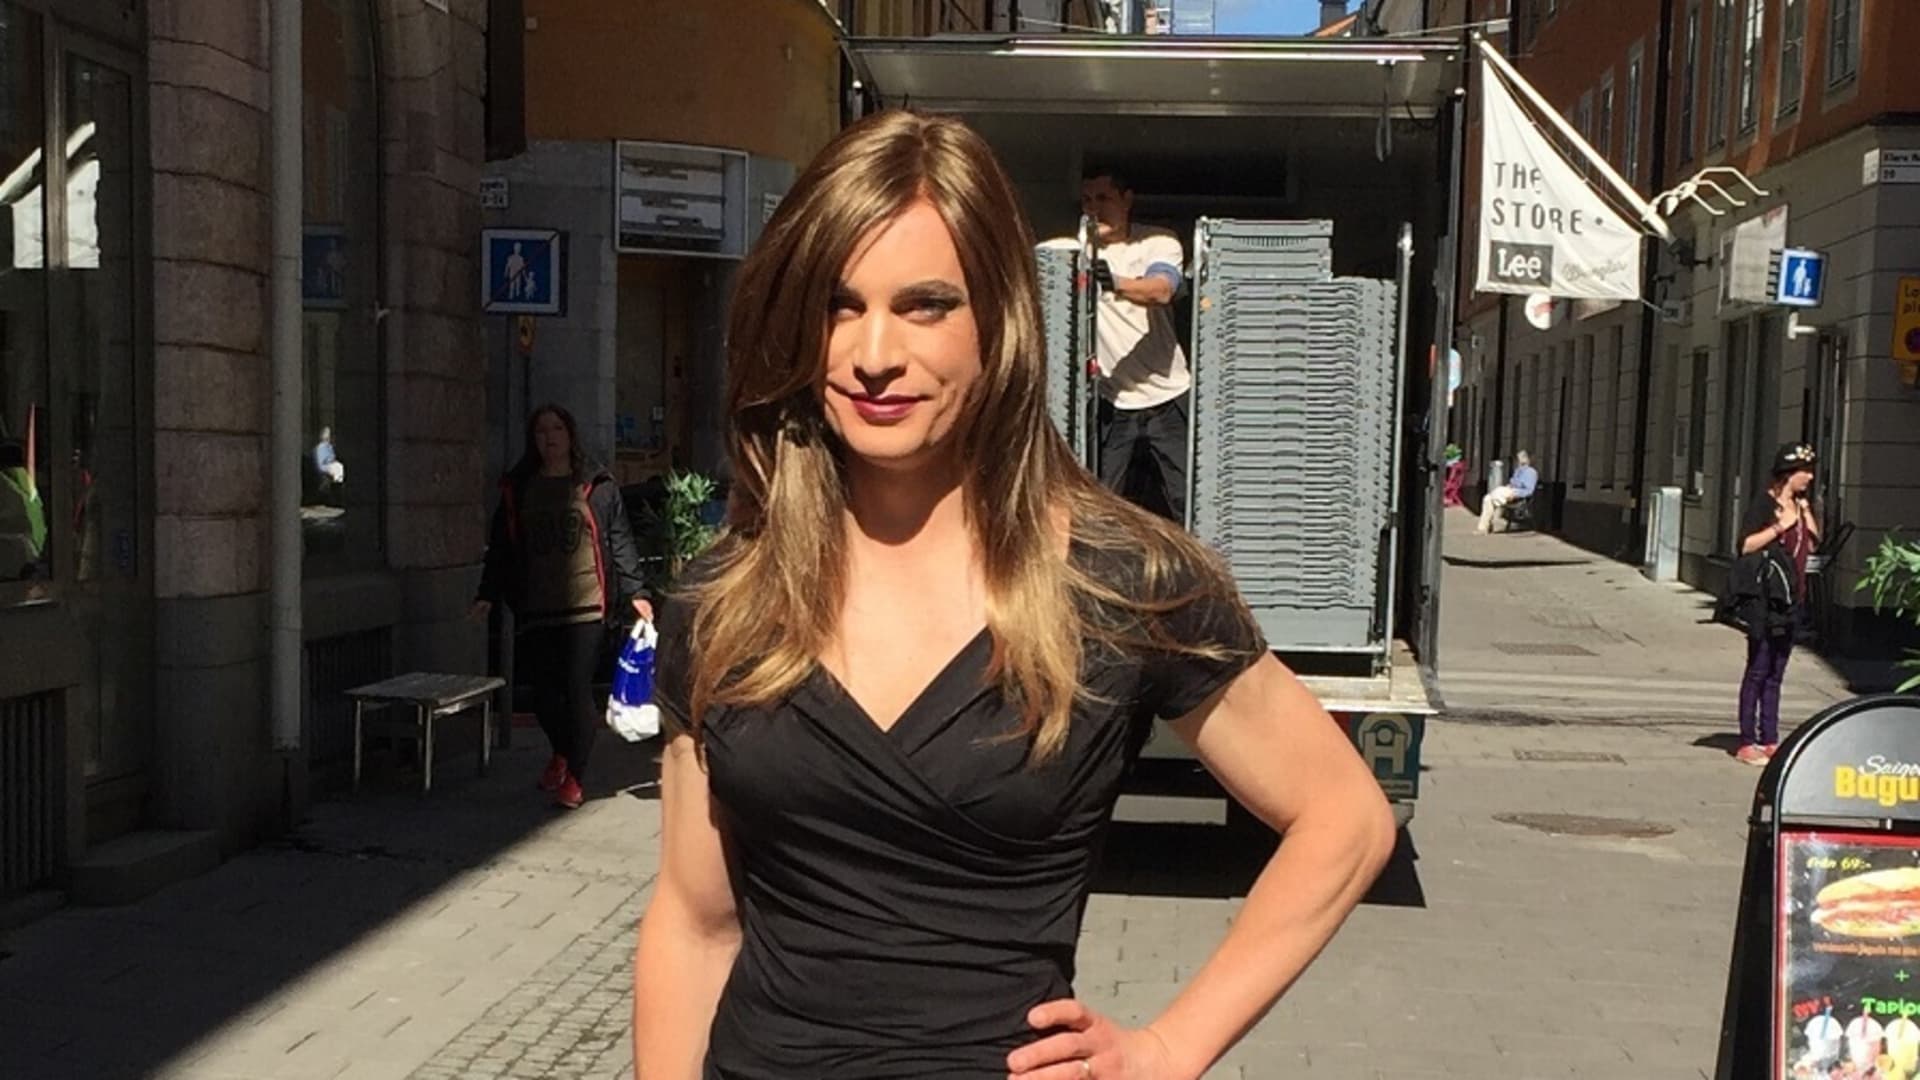 The first day Farberger dressed as a woman on the streets of Stockholm, on June 5, 2017.